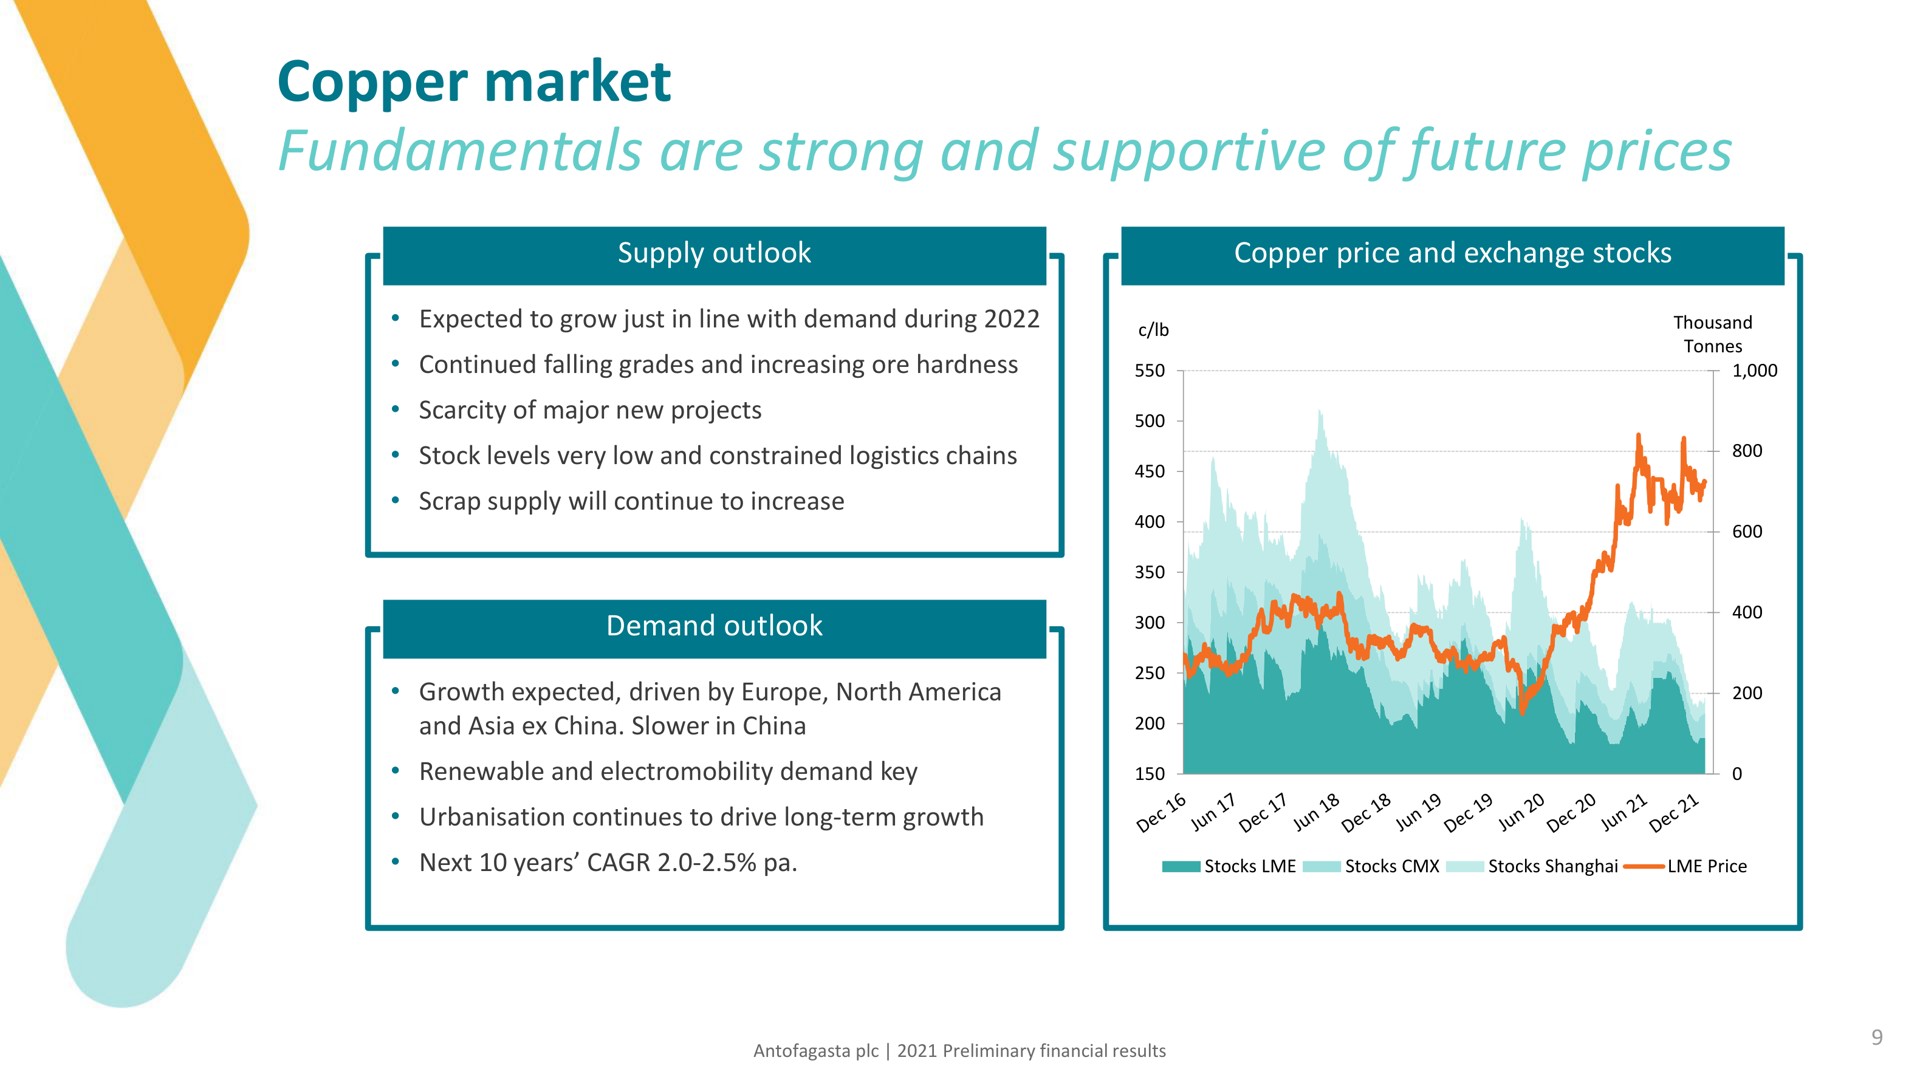 copper market fundamentals are strong and supportive of future prices | Antofagasta